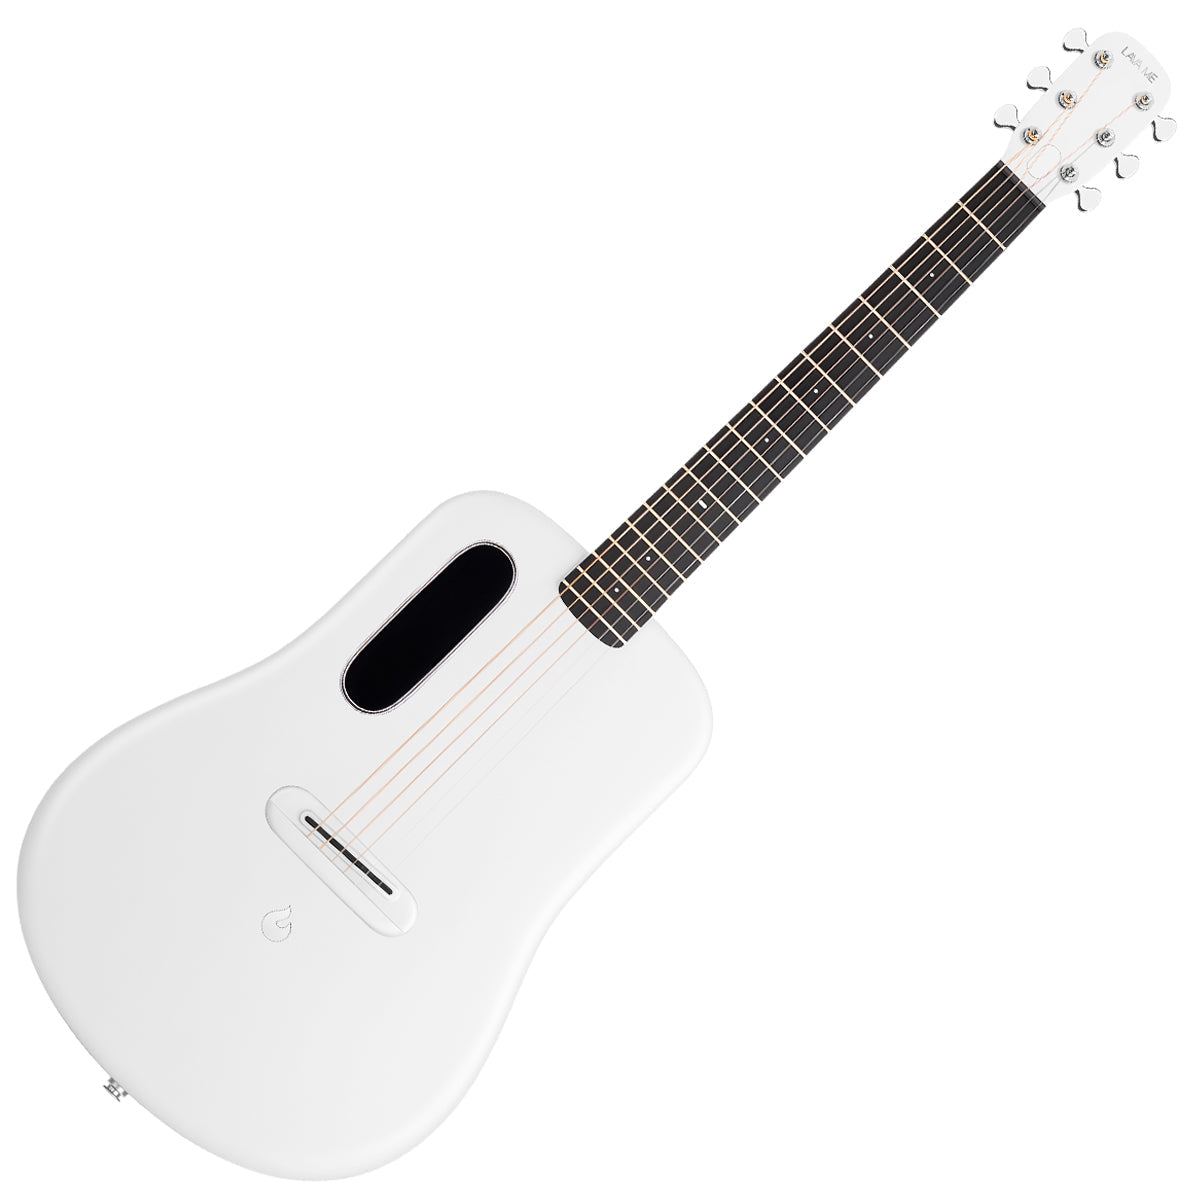 LAVA ME4 Carbon 36" with Space Bag ~ White, Acoustic Guitar for sale at Richards Guitars.